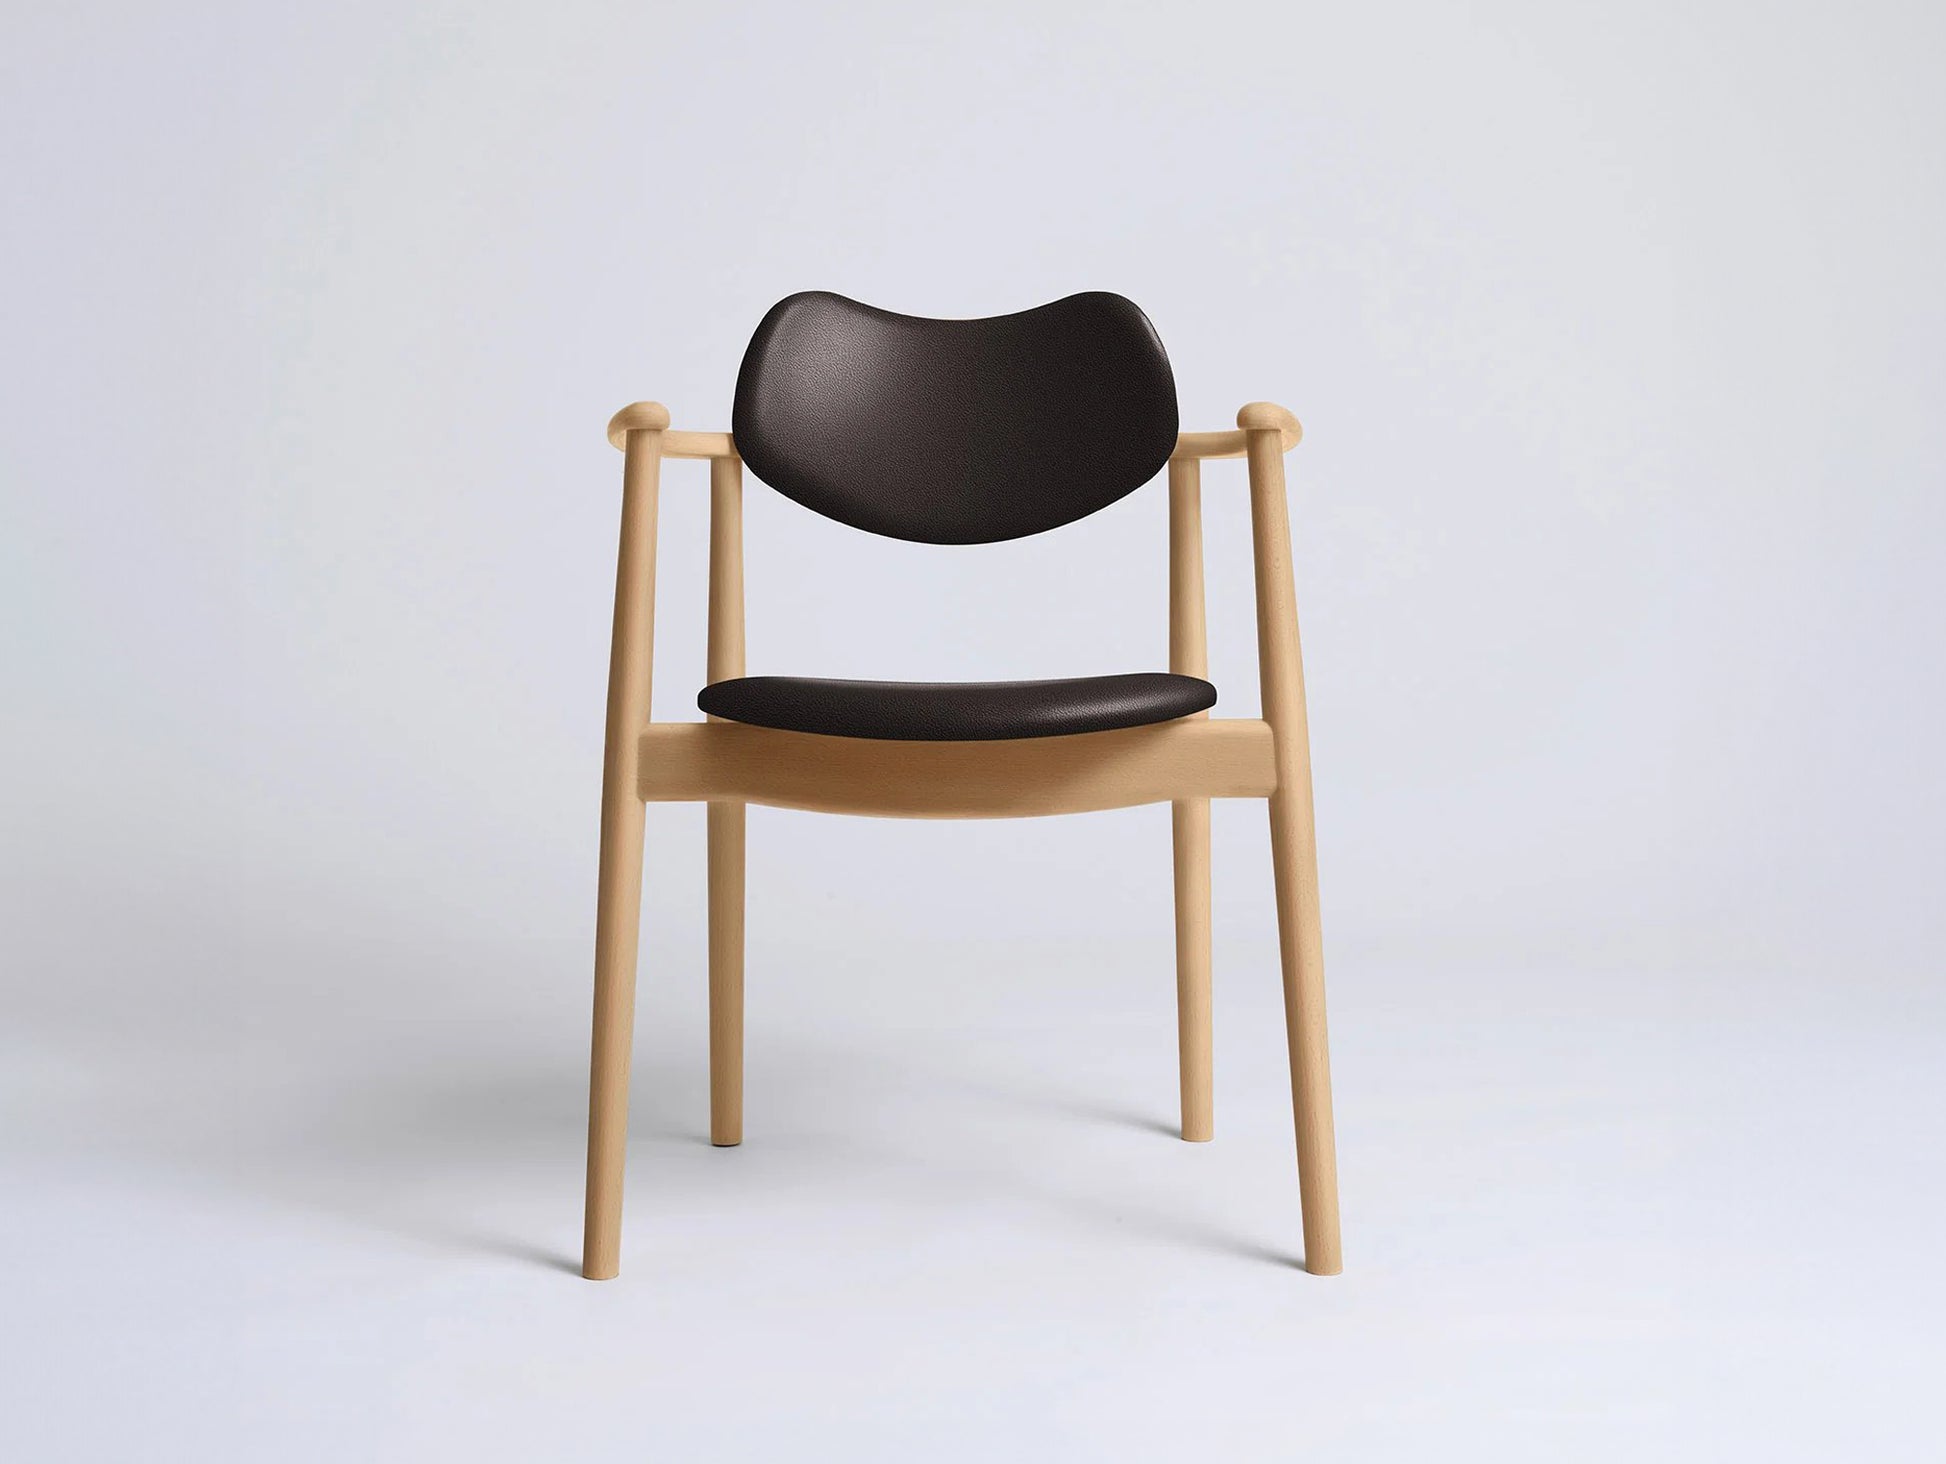 Regatta Chair Seat and Back Upholstered by Ro Collection - Oiled Beech / Standard Sierra Dark Brown Leather